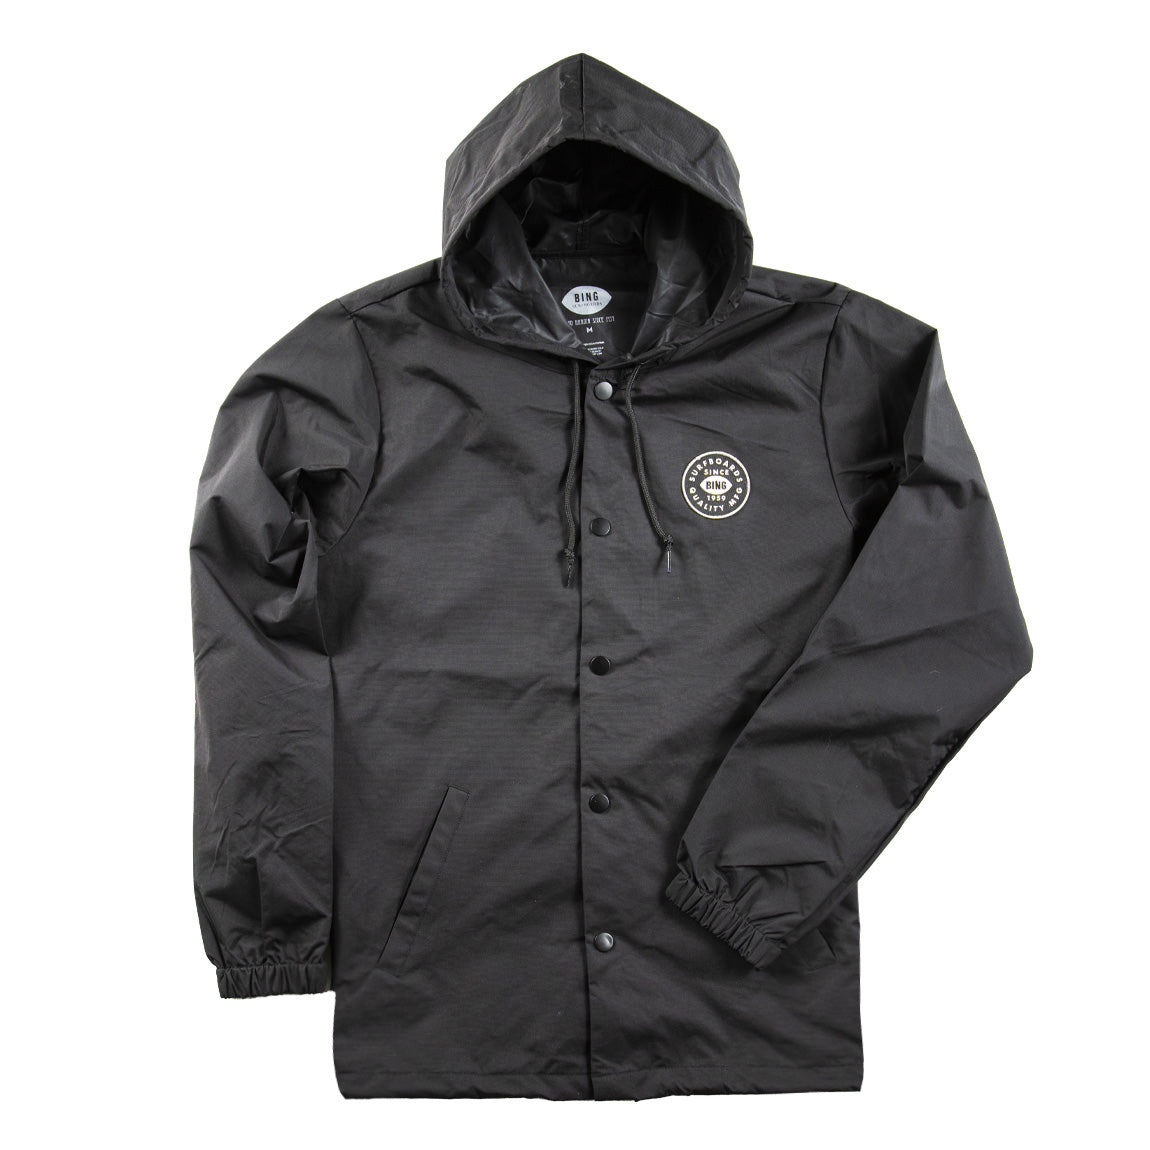 QUALITY PATCH Hooded Coaches Jacket Black